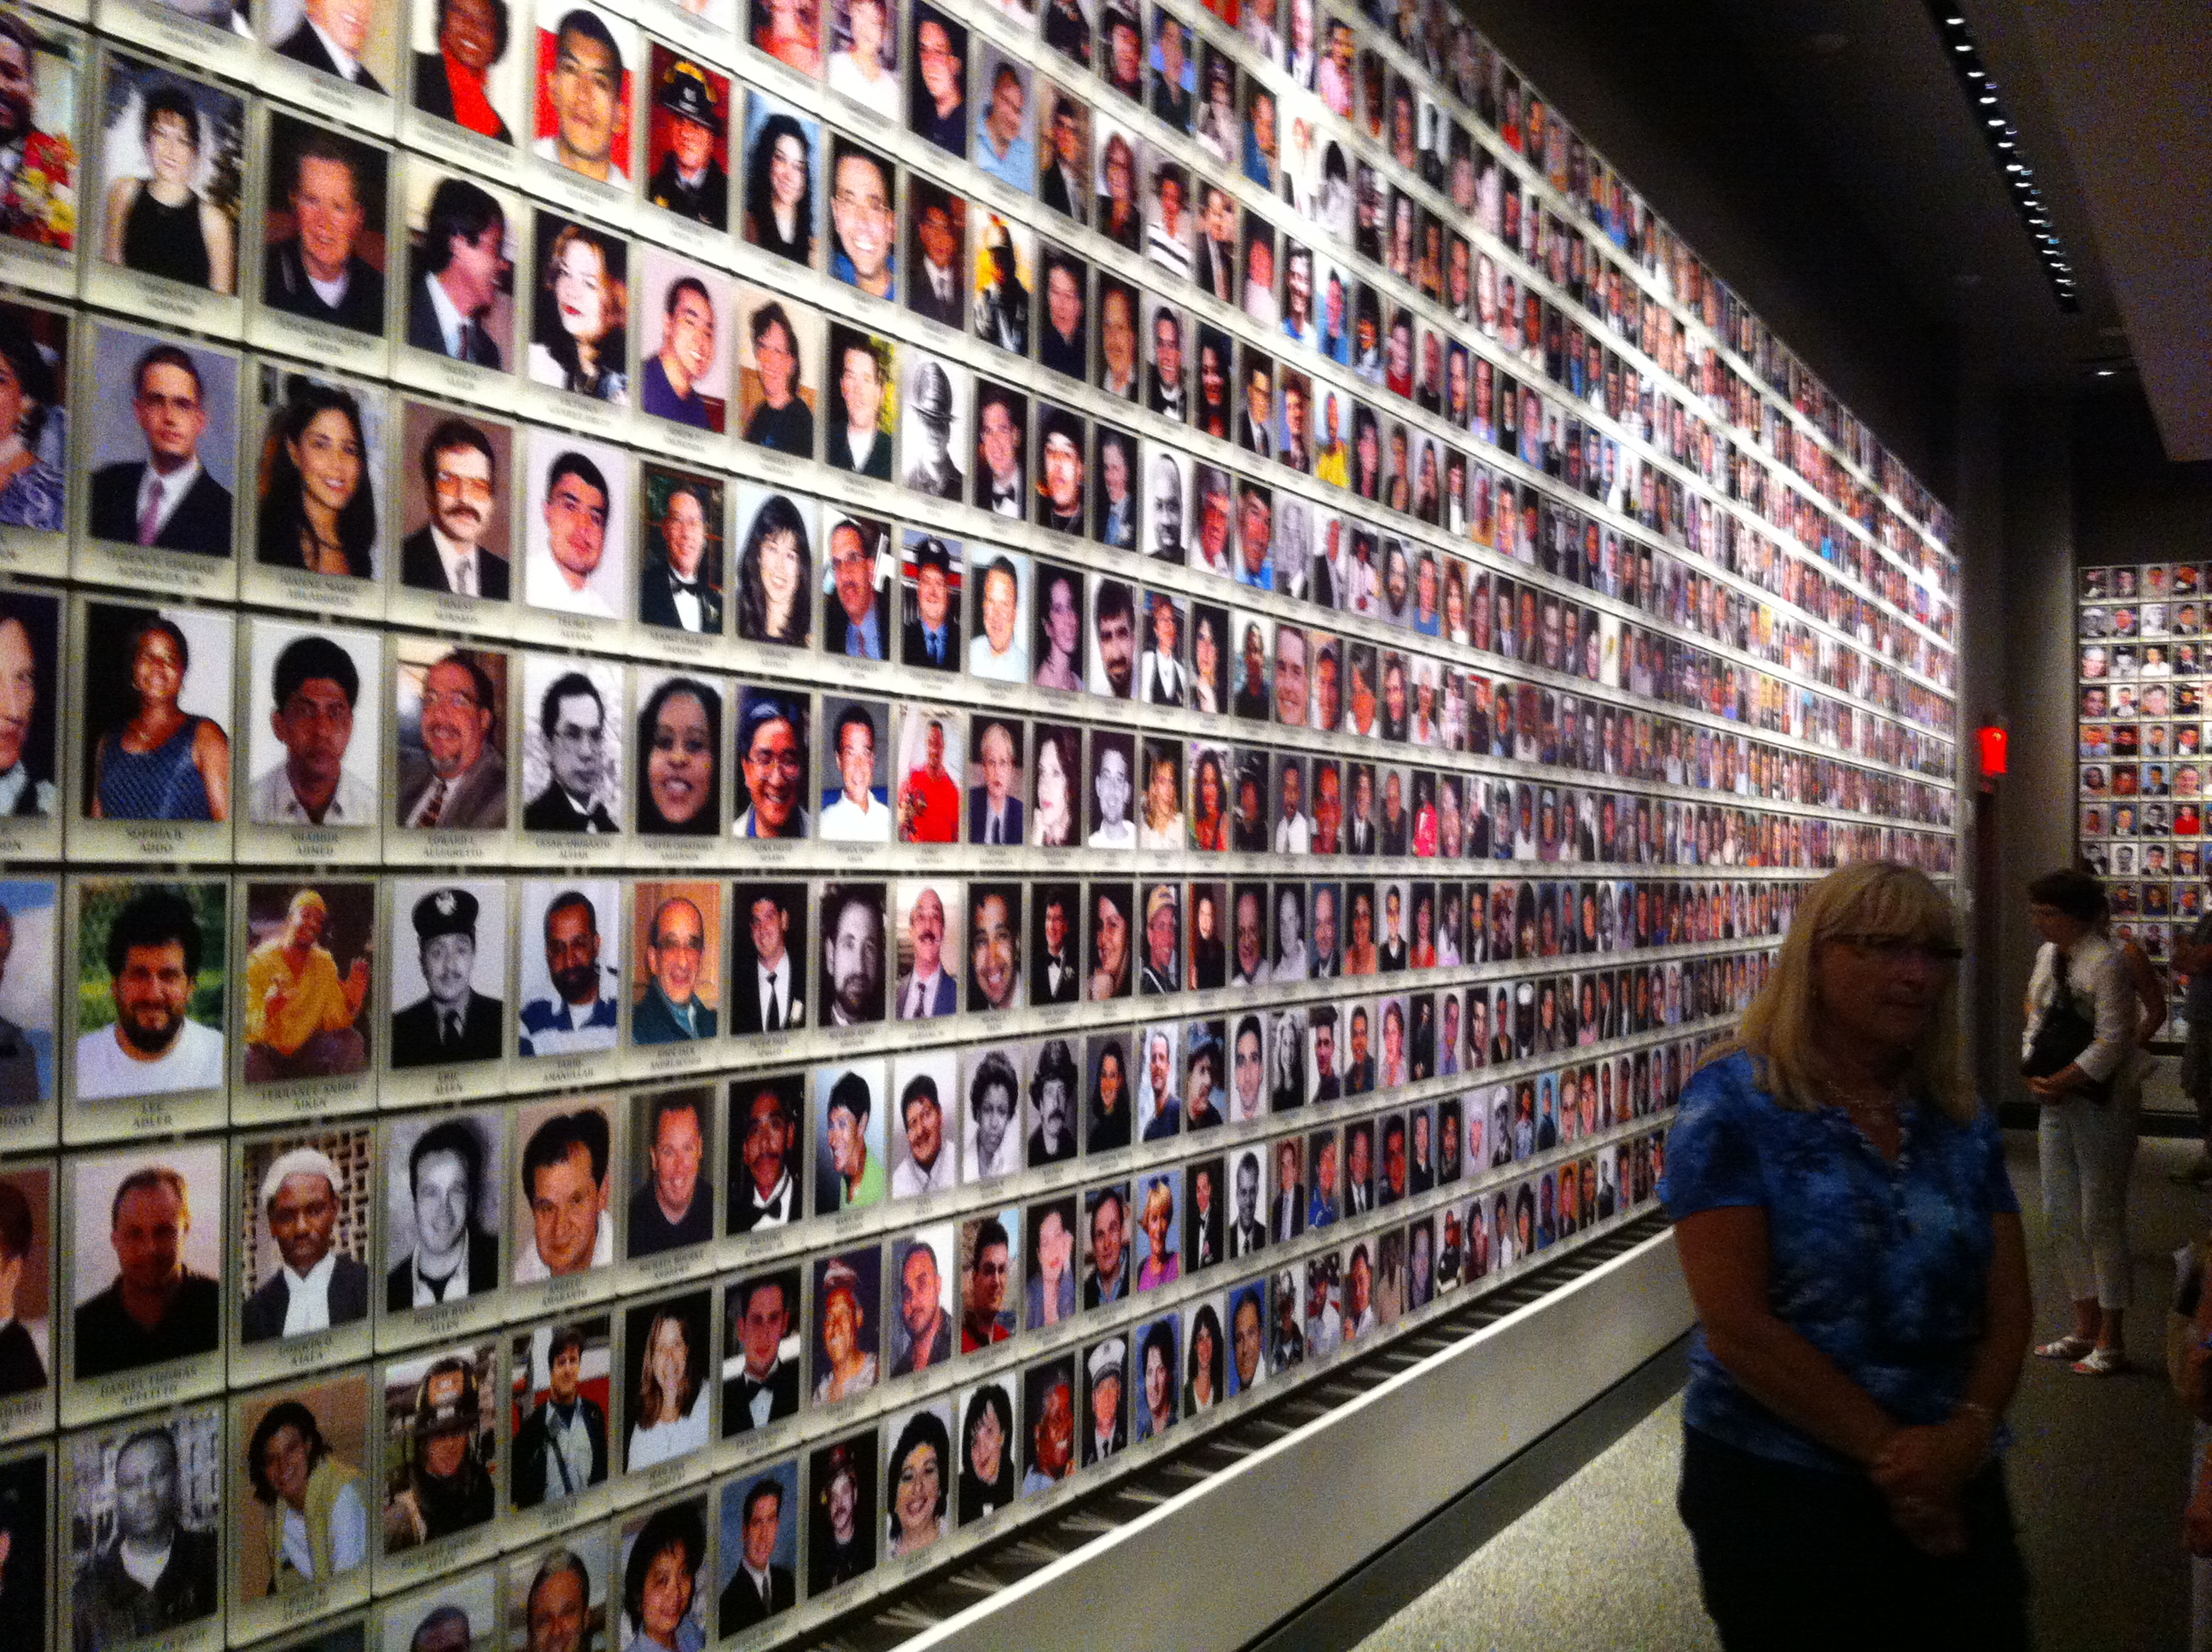 9/11 photos of those who died